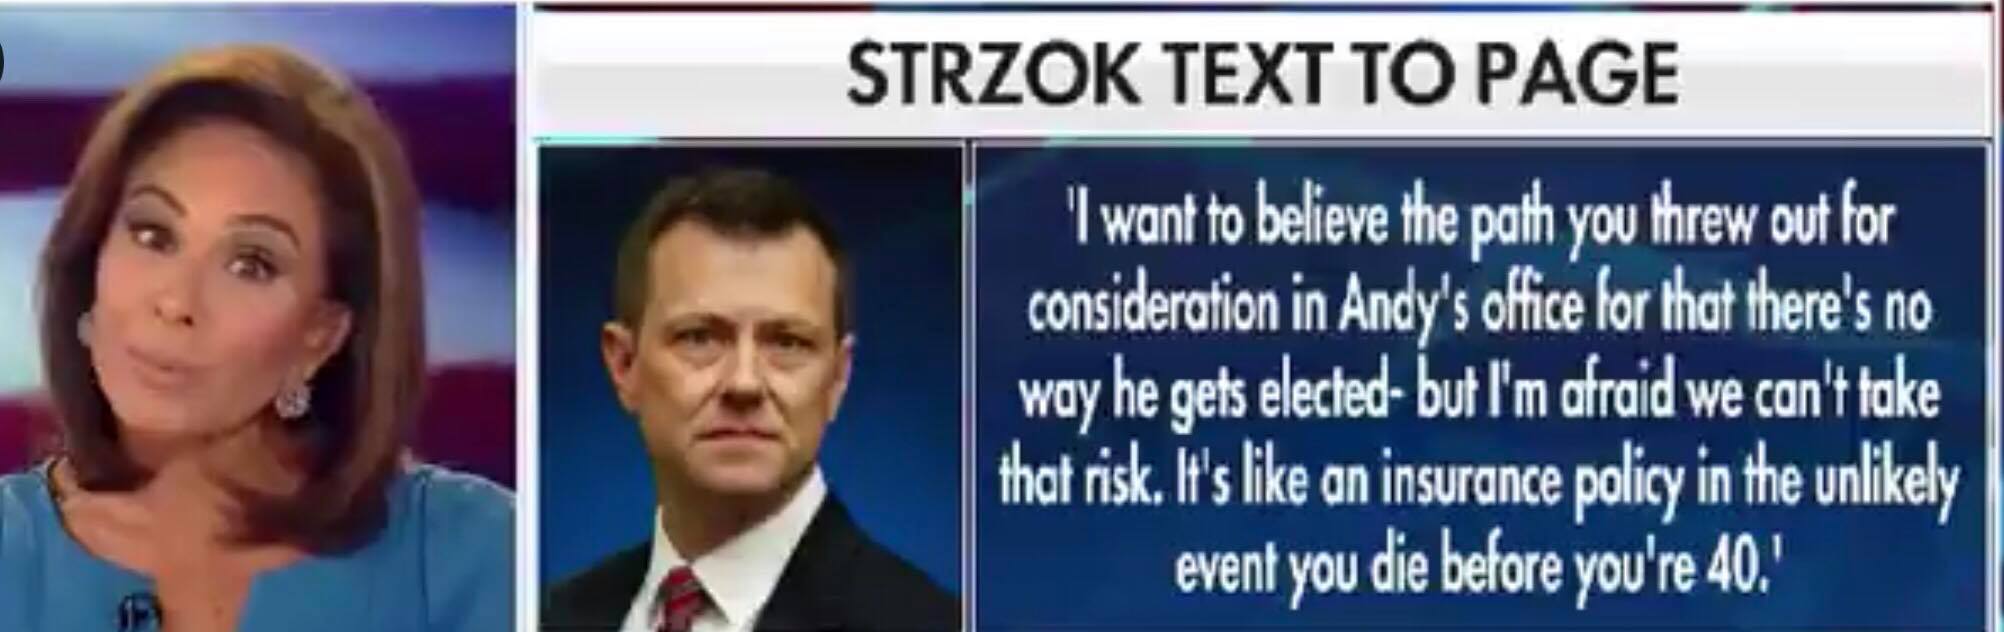 Pirro showcases Strzok text to Page. Photo courtesy of US4Trump with Fox News screen capture enhancement.